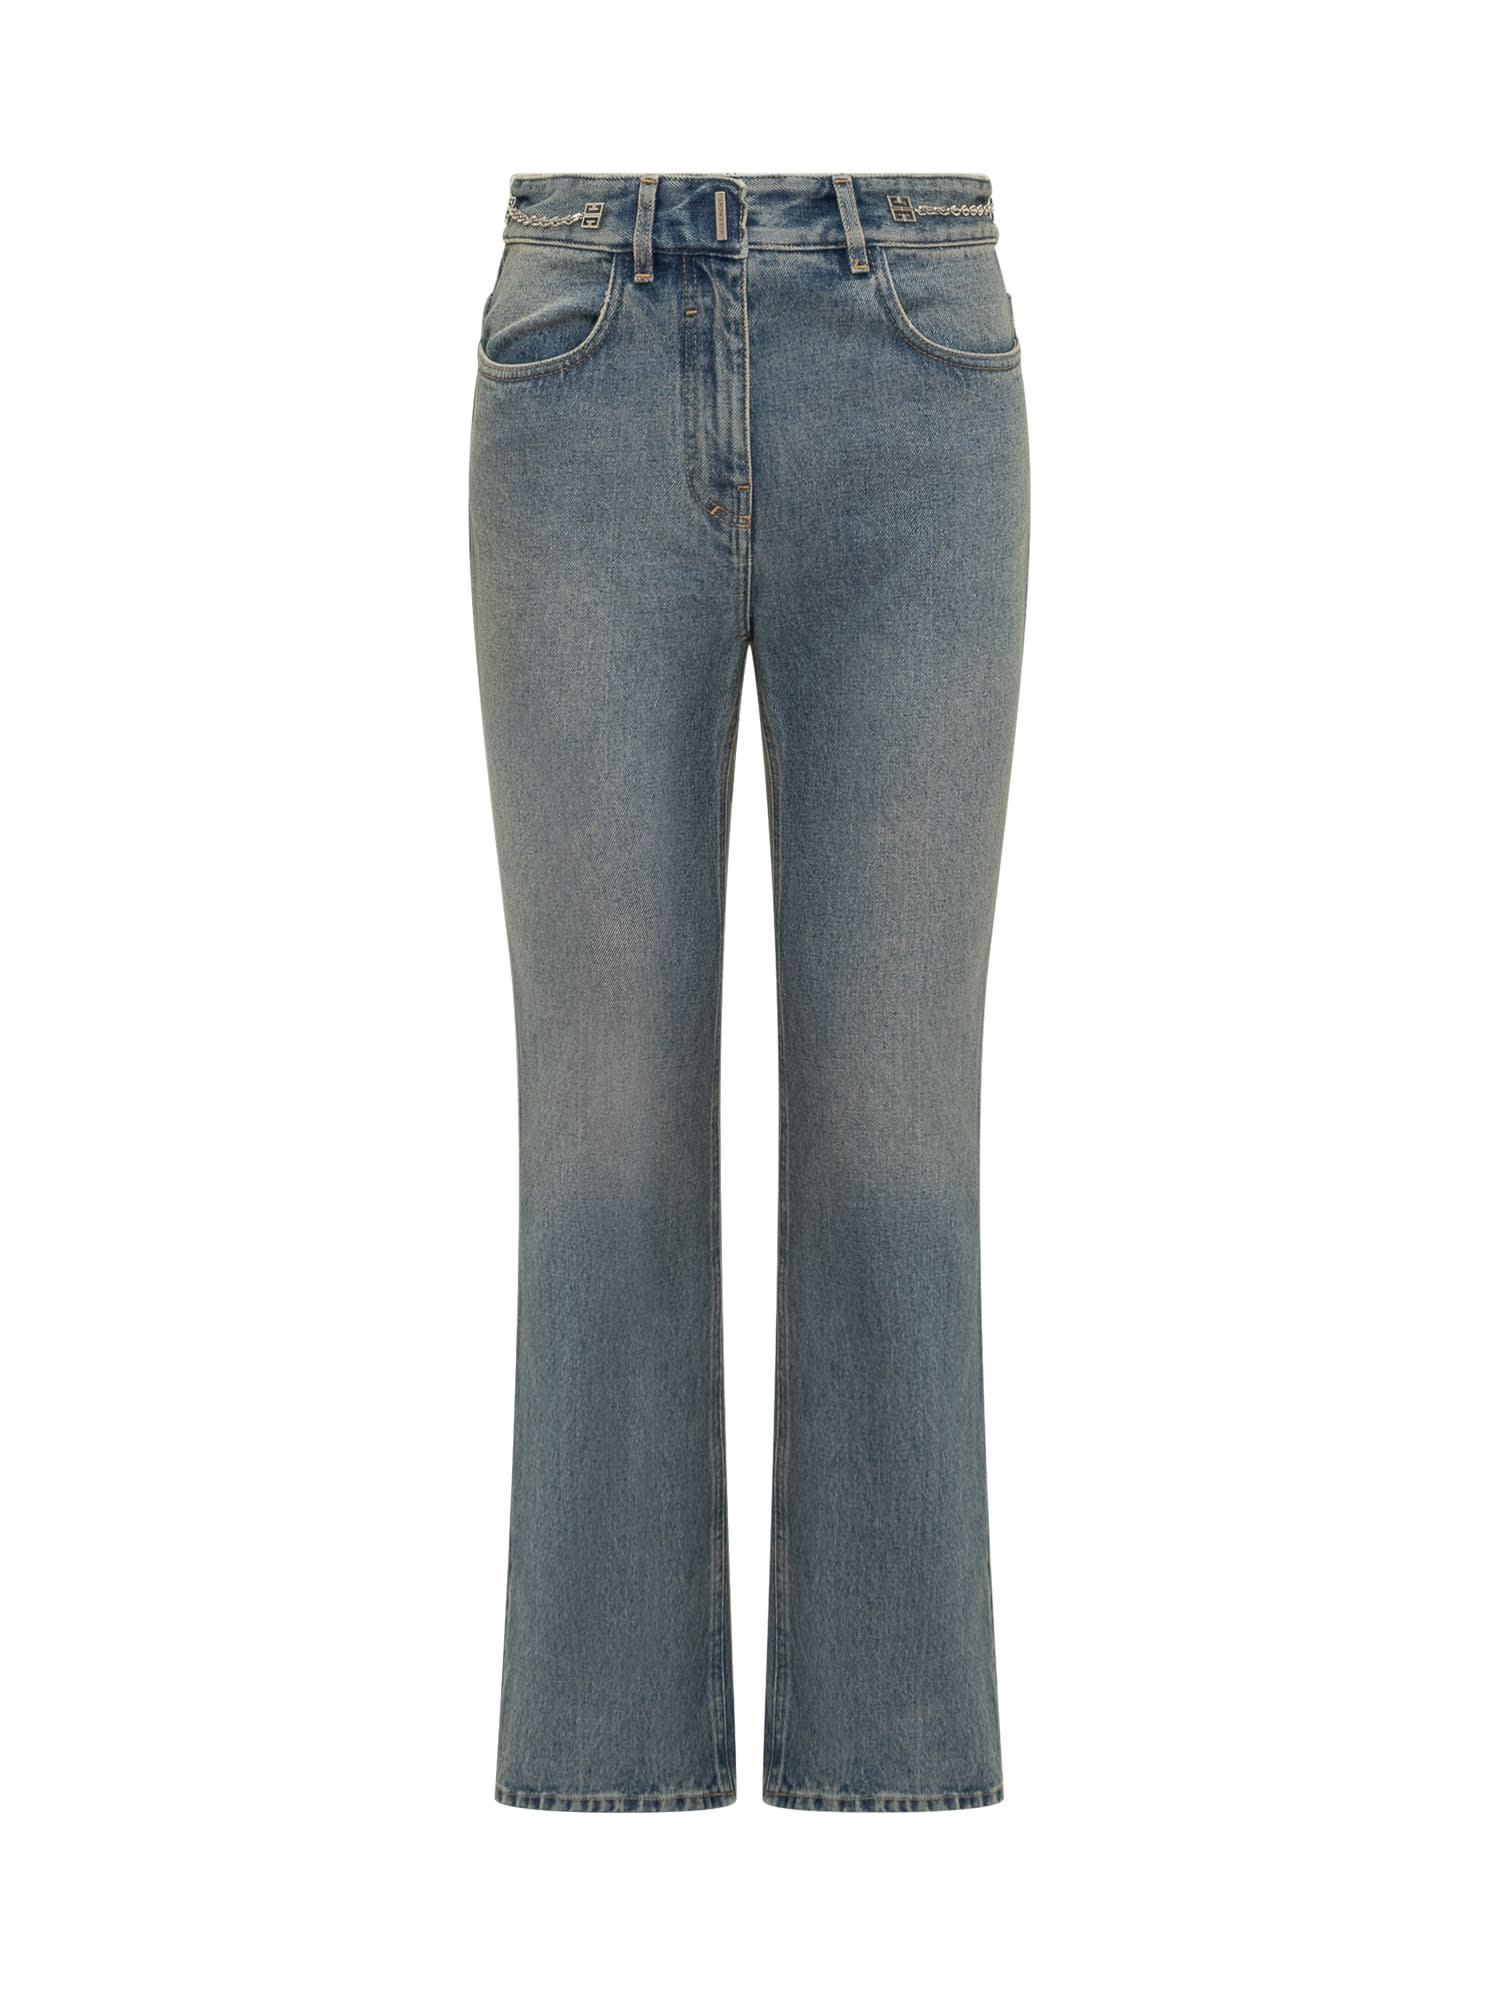 GIVENCHY DENIM BOOT CUT JEANS